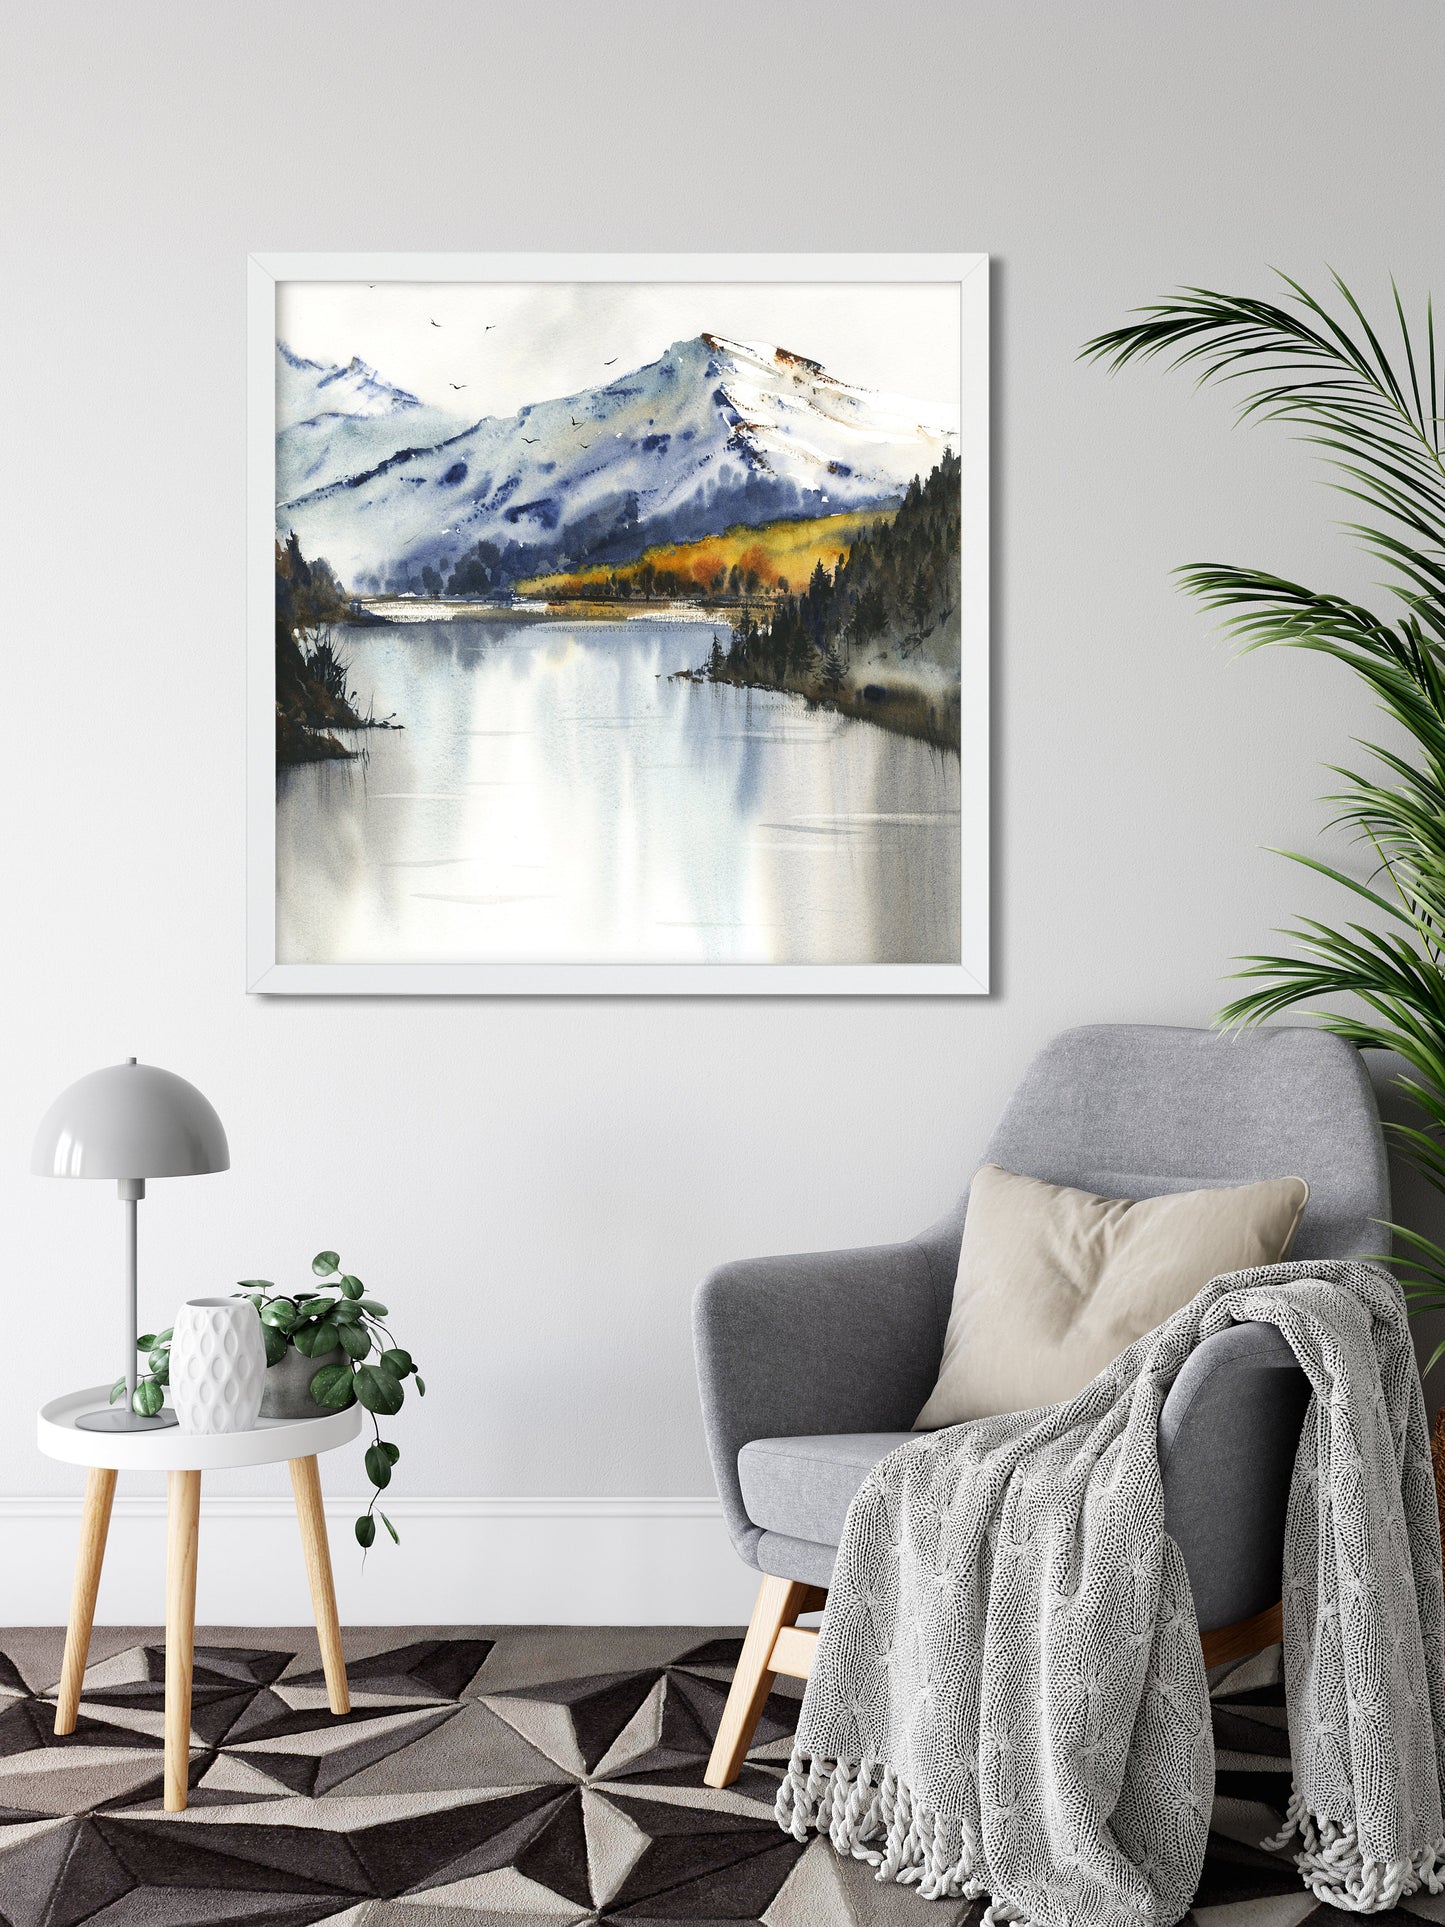 Abstract Square Print, Mountain Wall Art, Watercolor Landscape, Painting on Canvas, 8x8, 10x10 Print, 16x16, 24x24 Print